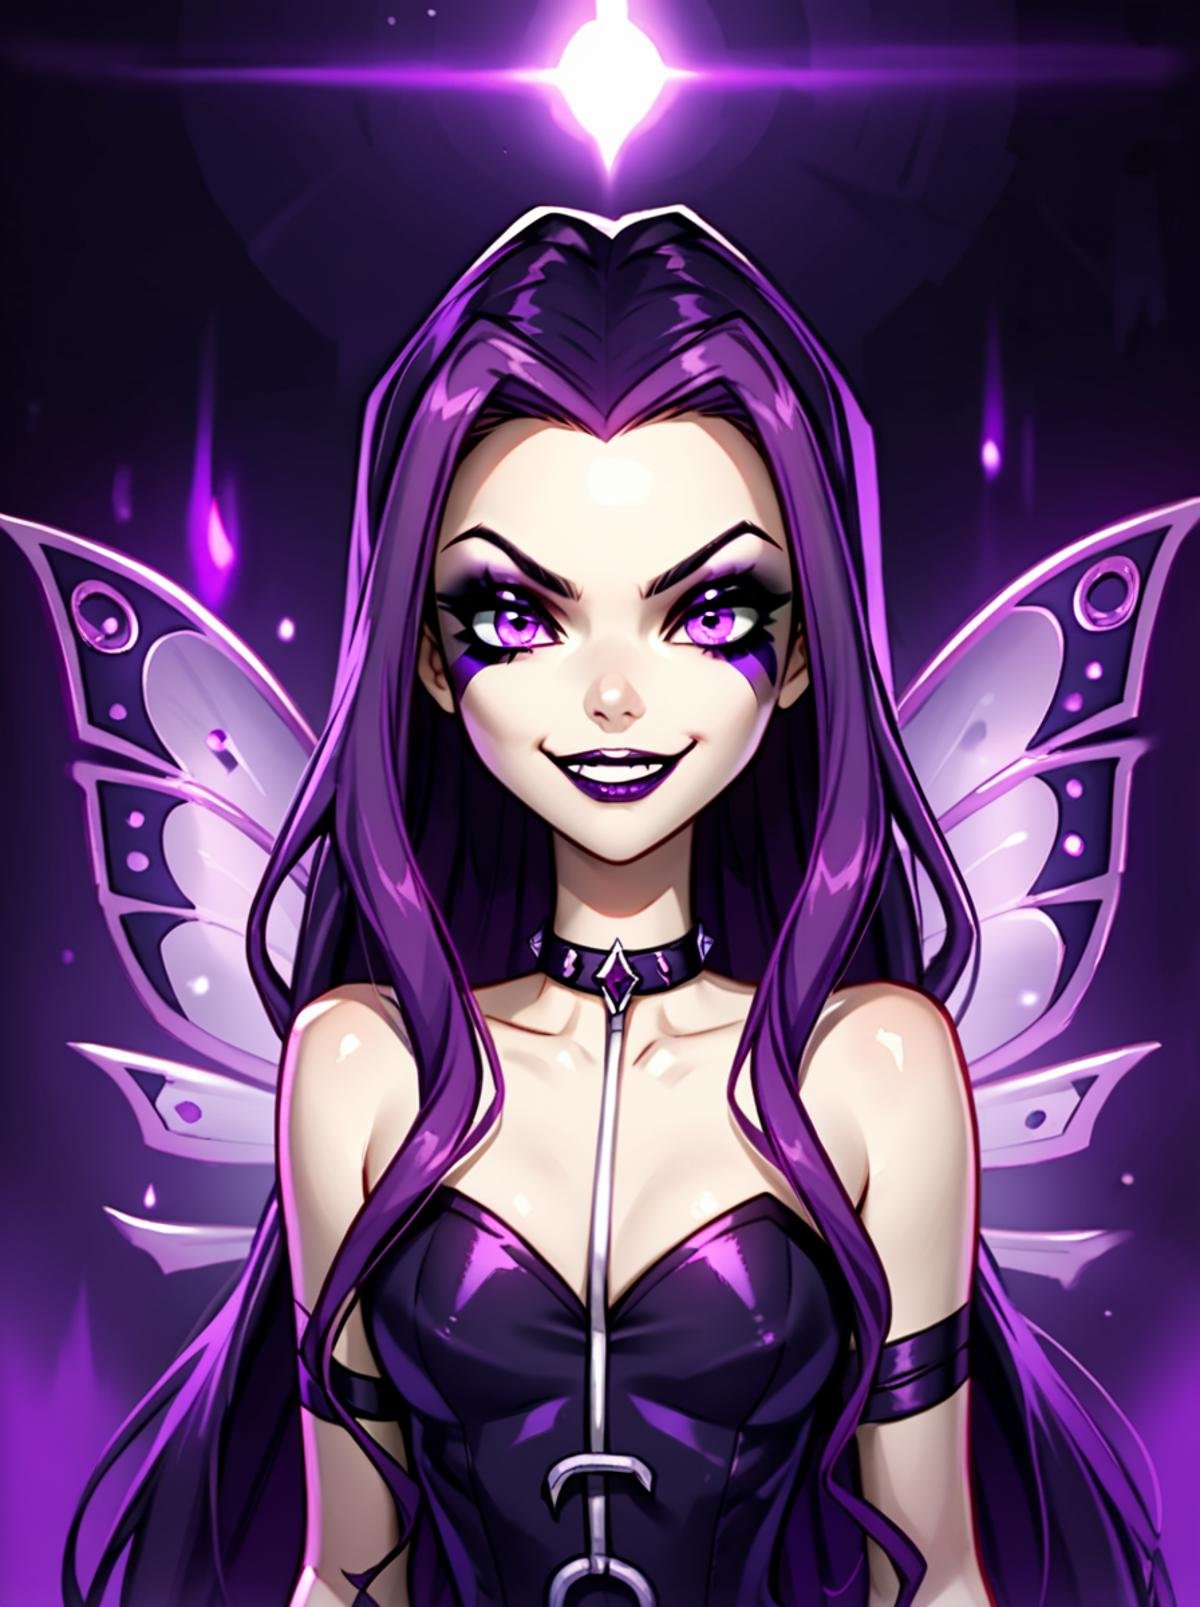 score_9, score_8_up, score_7_up, <lora:WinxAndTrixPony:0.8>,winxtrix,Darcy,1 girl, solo, long wavy dark purple hair, violet eyes, wearing a dark purple and black fairy outfit, sinister fairy wings, slender build, mischievous smile, pale skin, dark magical aura, surrounded by shadows.